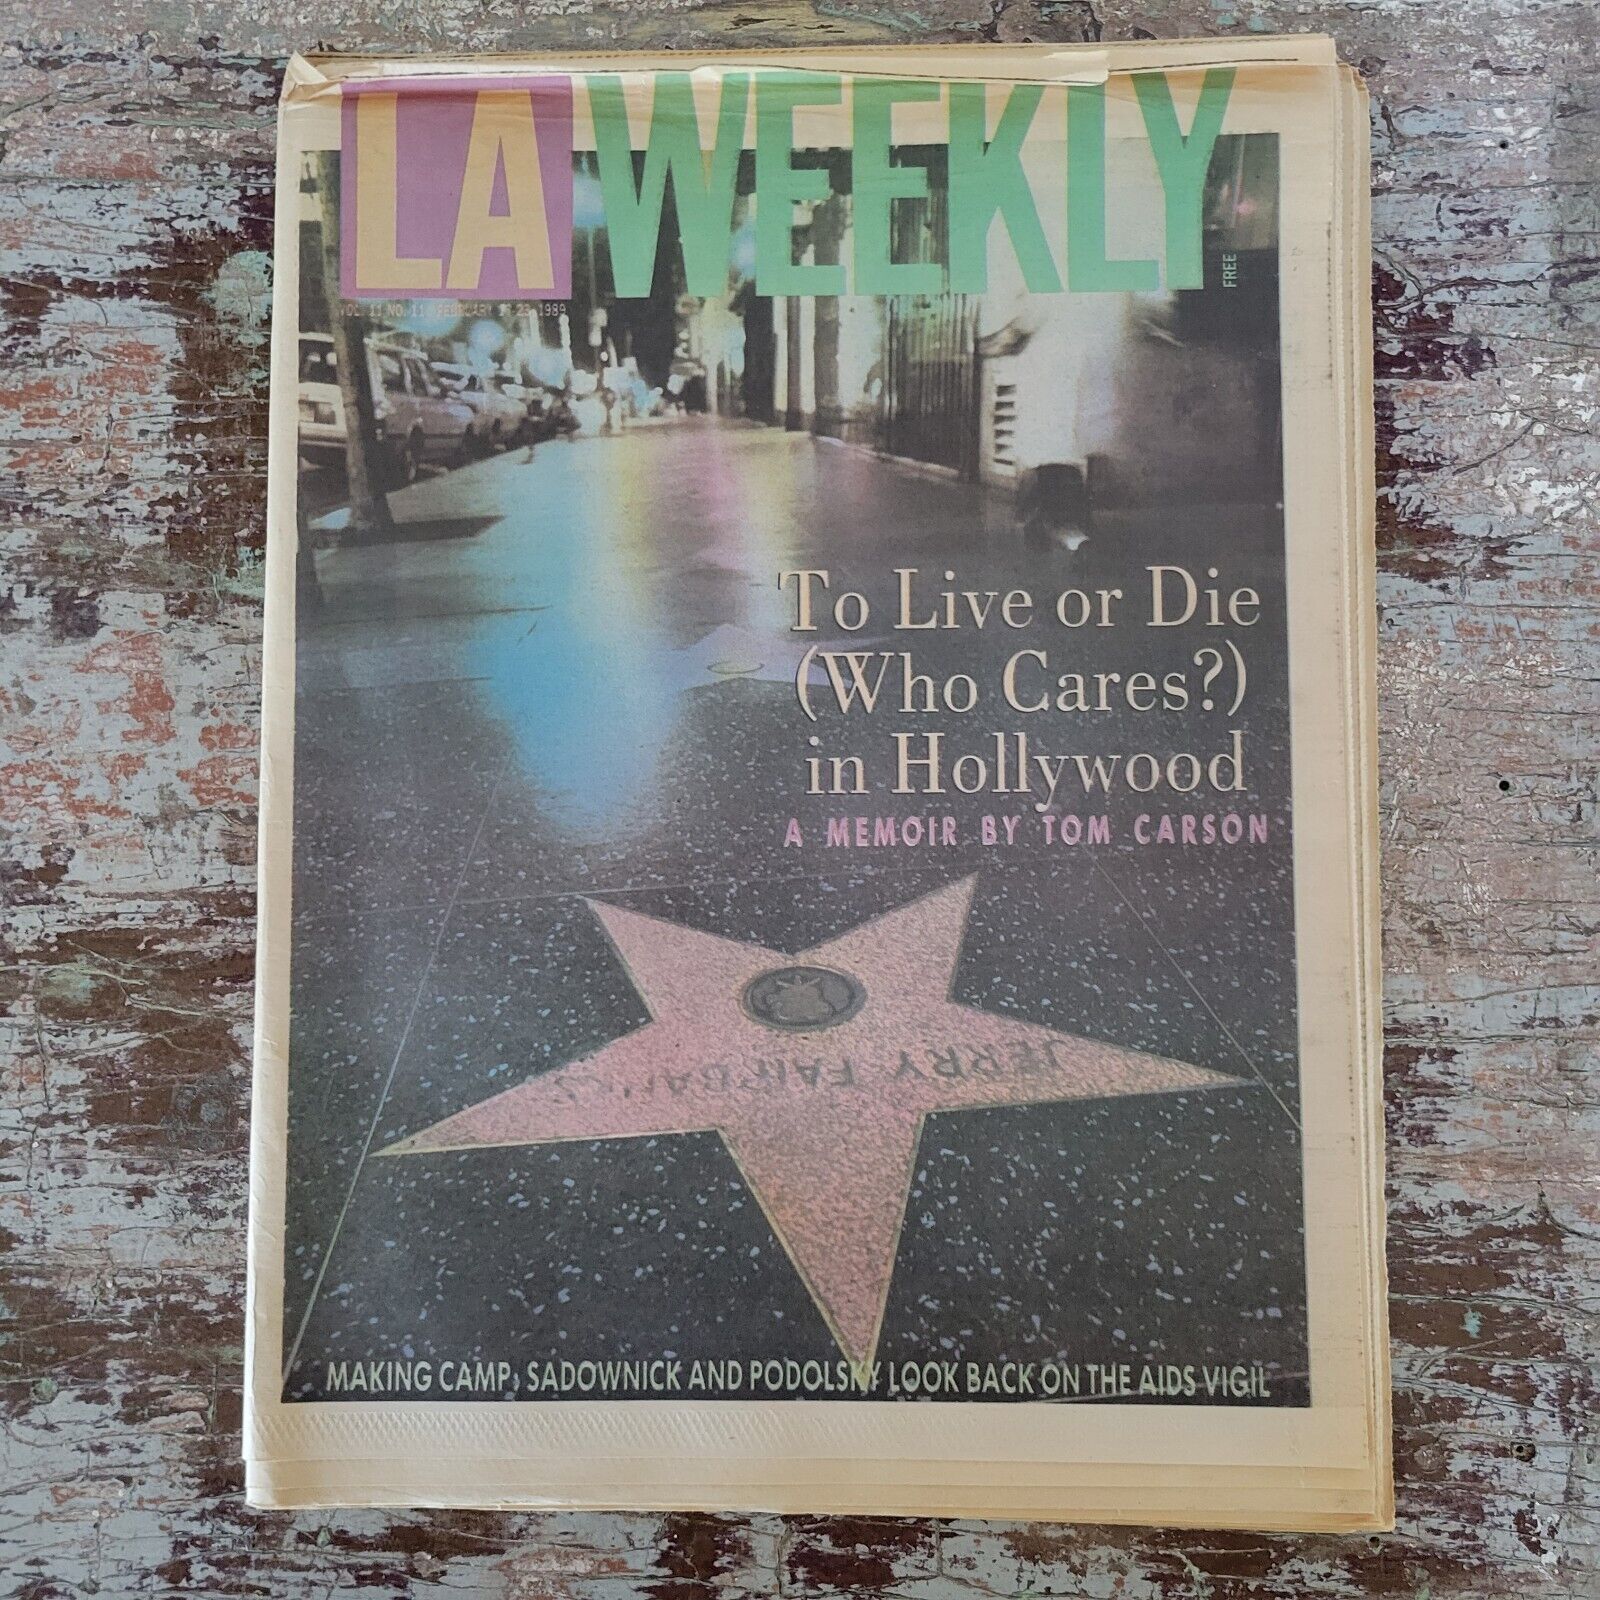 Vintage February 1989 LA Weekly Newspaper Magazine Lou Reed No Doubt Concert Ad